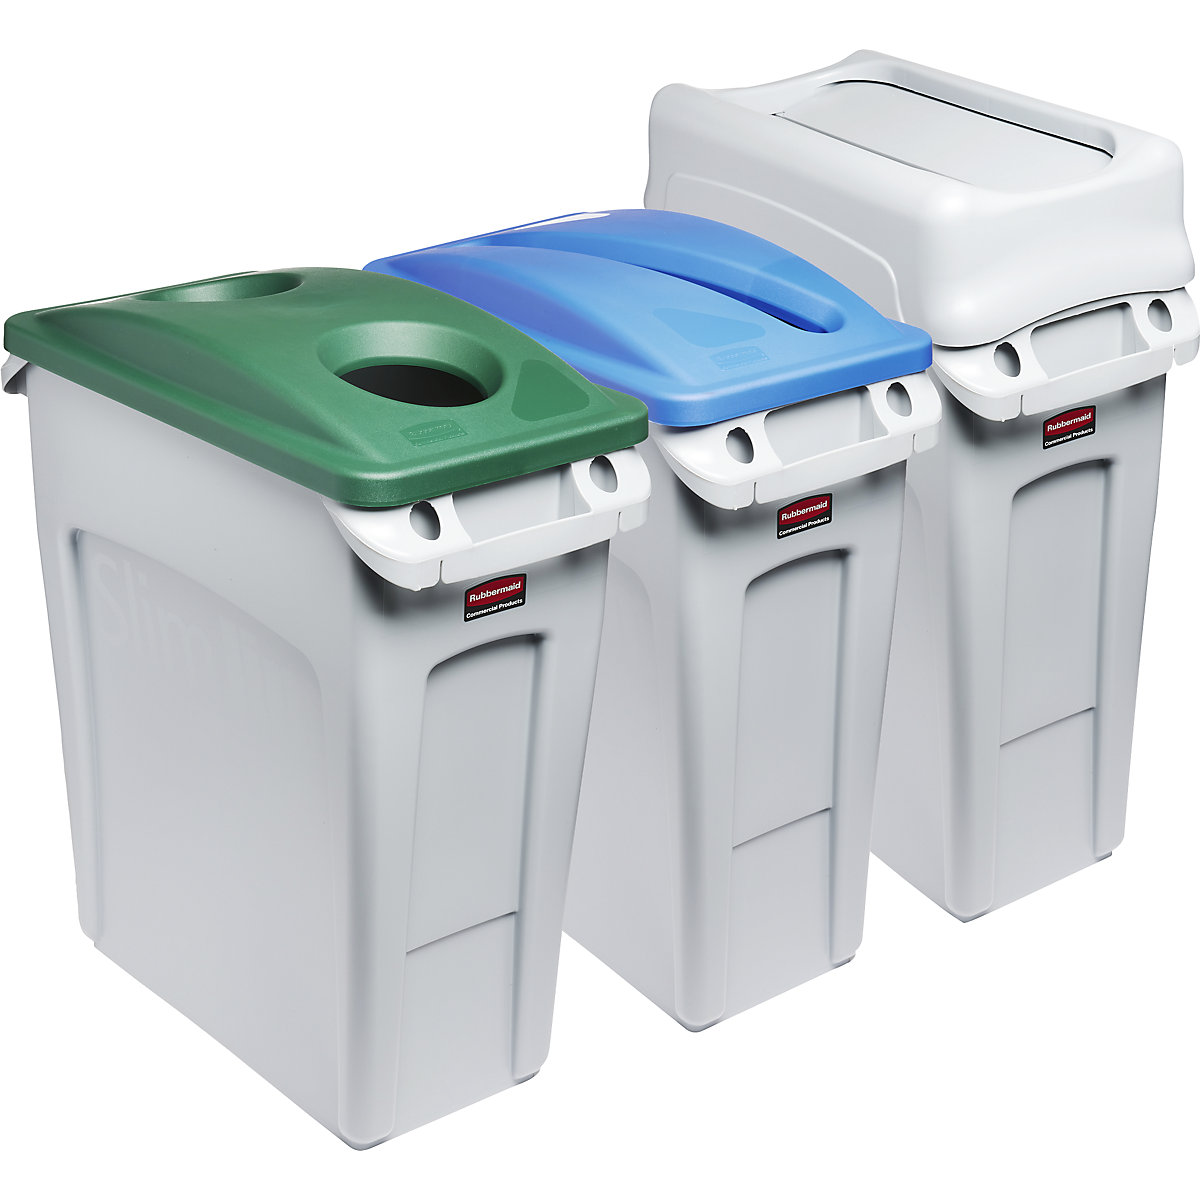 SLIM JIM® recyclable waste collection station, set of 3 – Rubbermaid